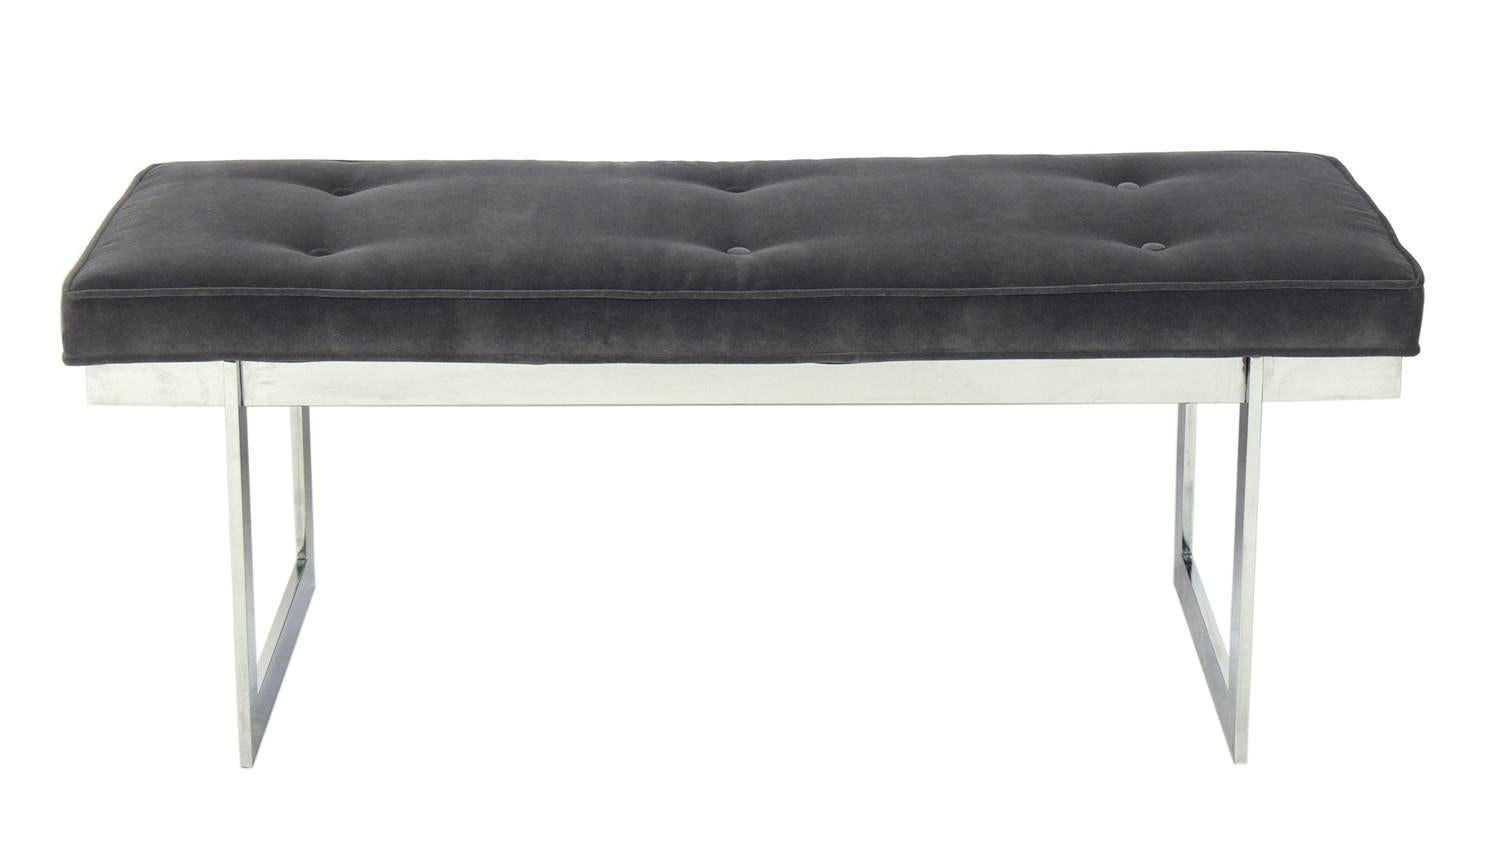 Clean Lined Chrome Bench in the manner of Milo Baughman, American, circa 1960s. It has been reupholstered in a charcoal grey velvety fabric.